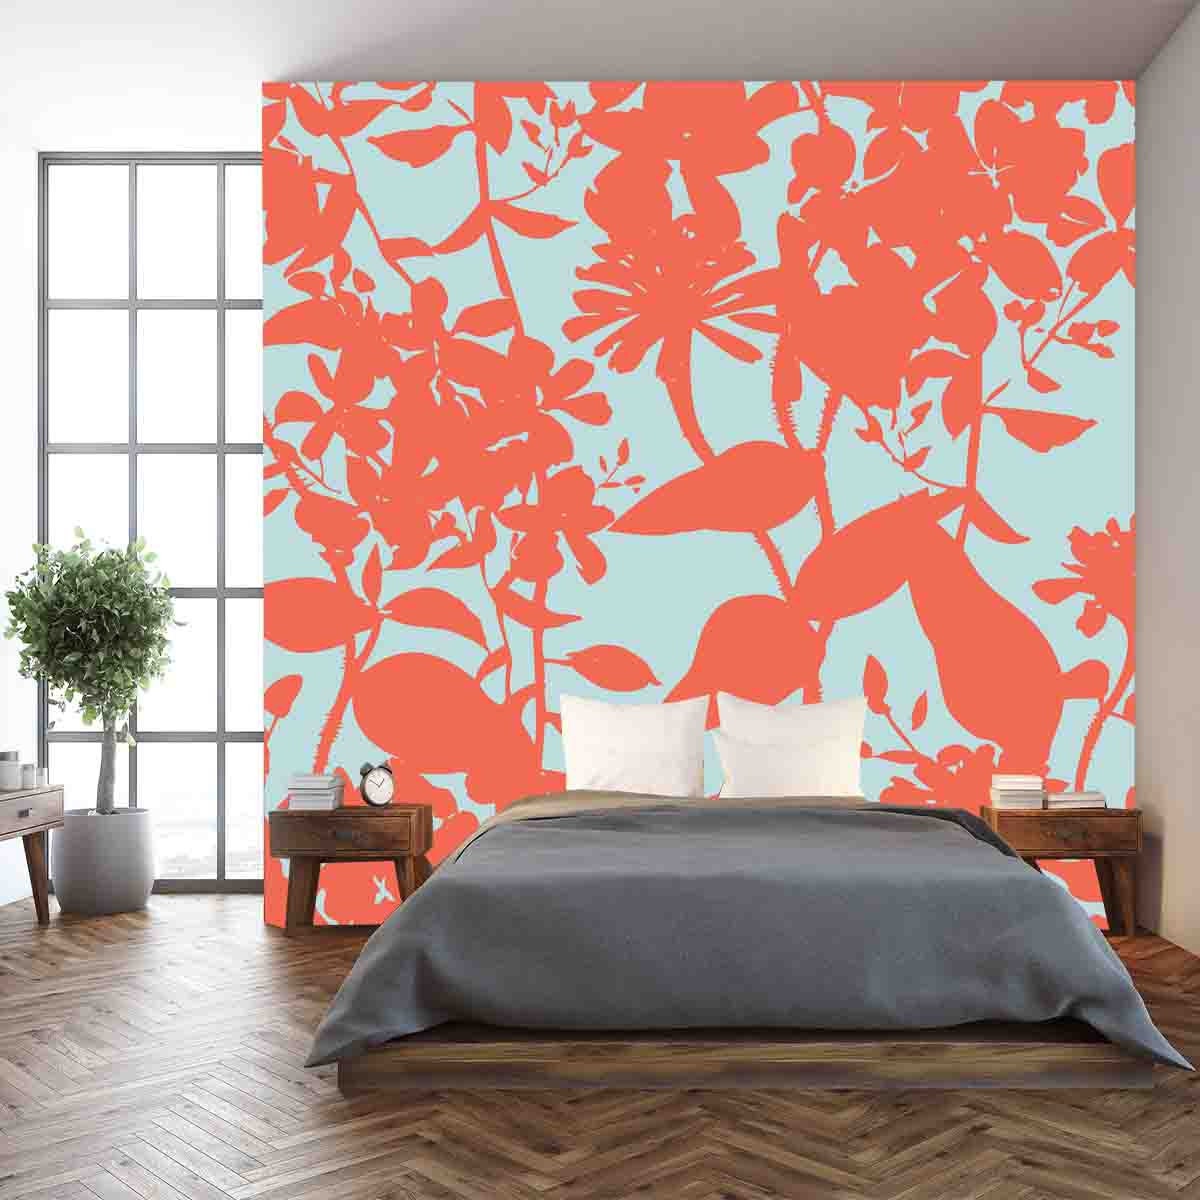 Silhouettes of Herbs and Meadow Wildflowers Wallpaper Bedroom Mural